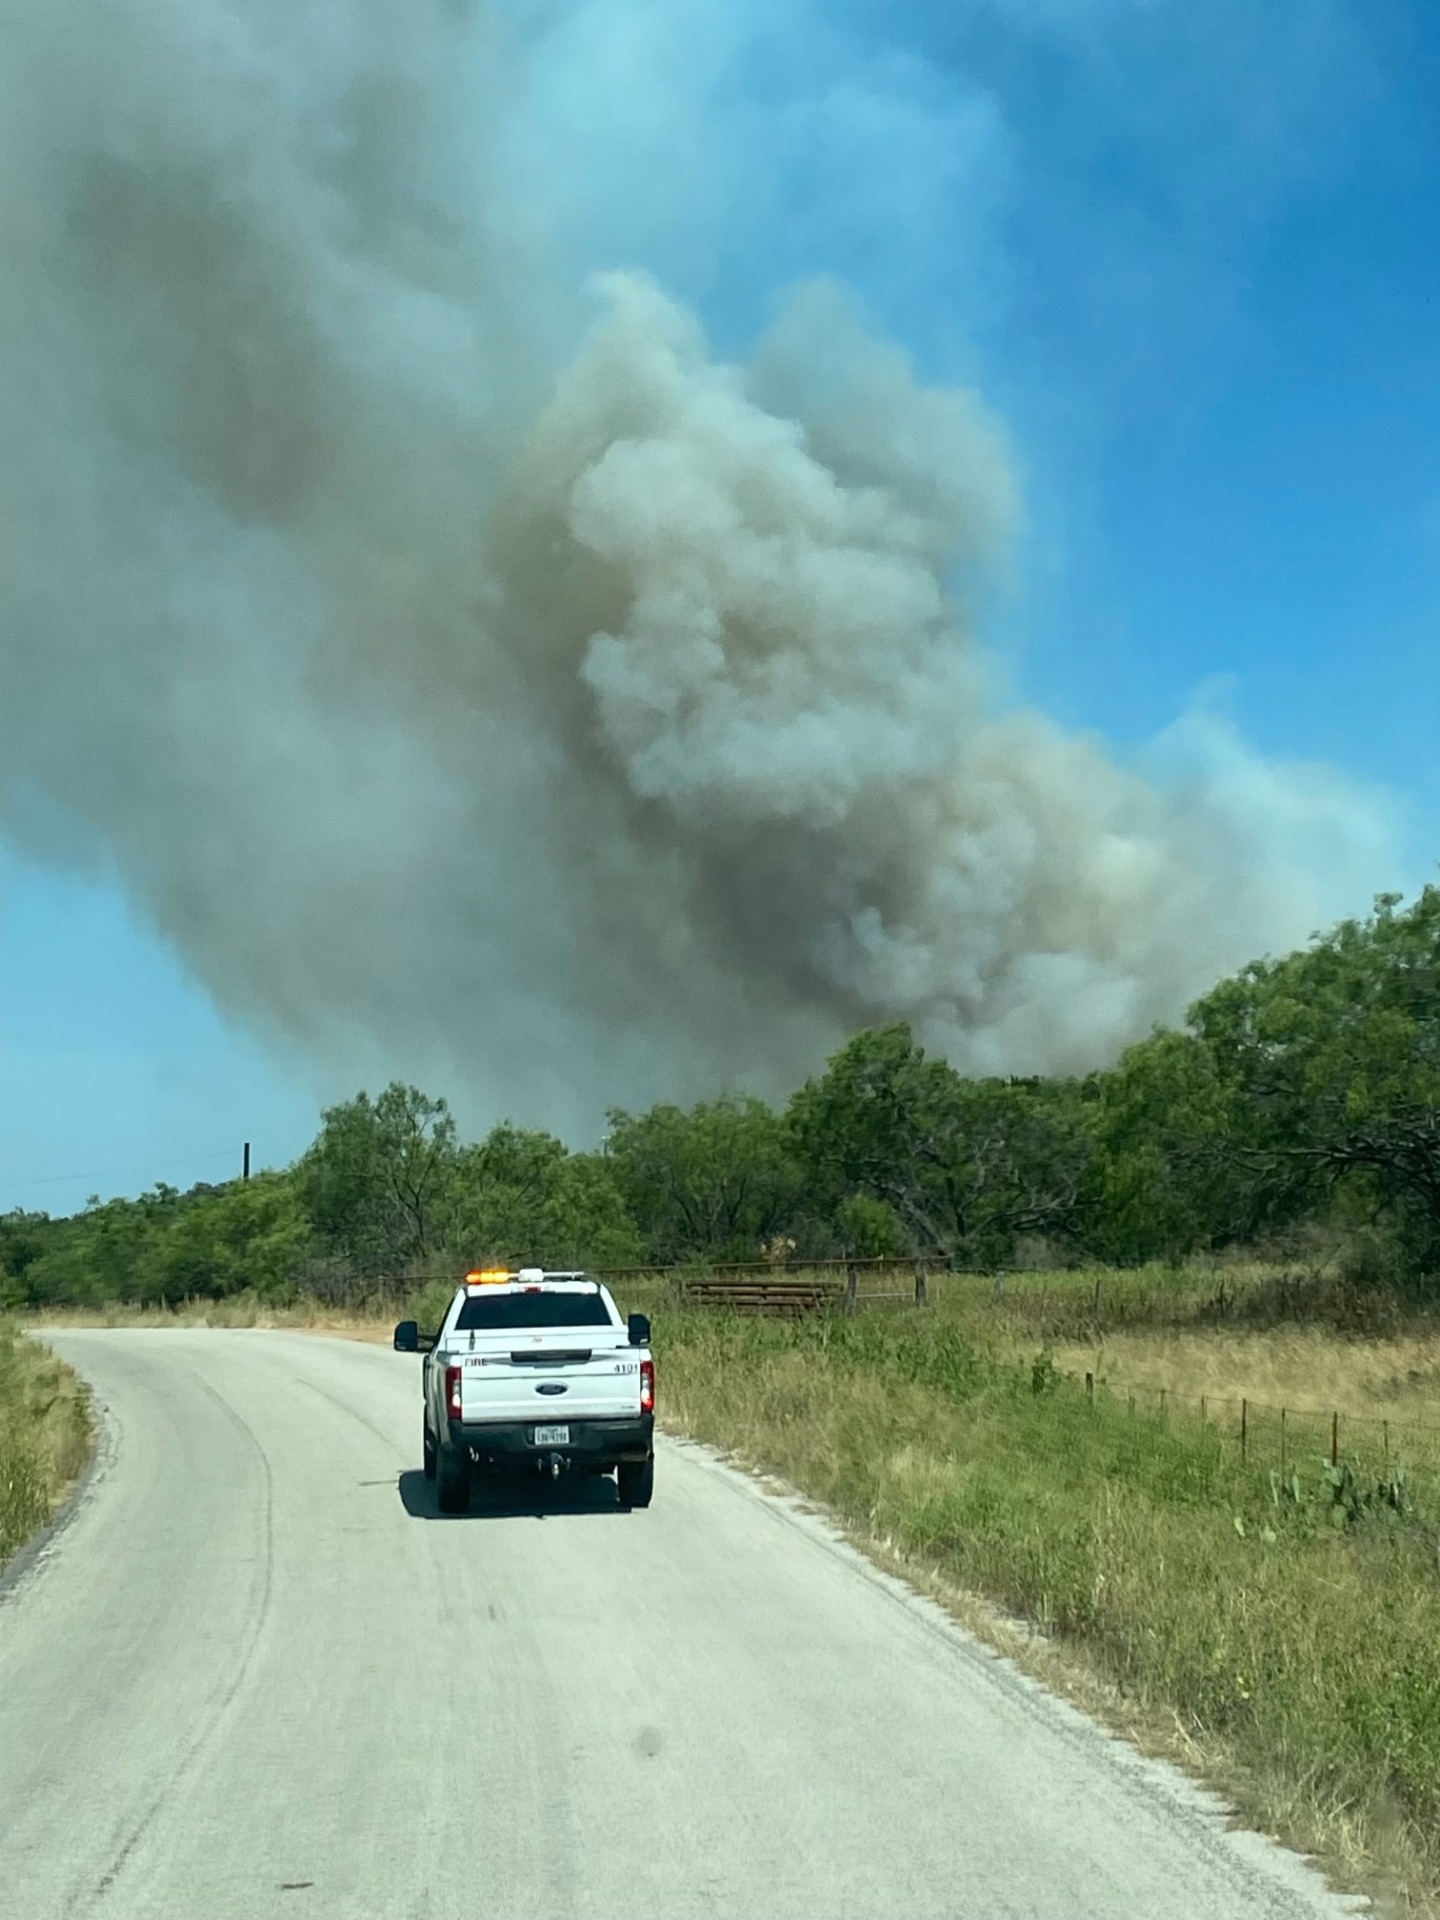 Texas Aandm Forest Service Issues Wildfire Danger Warning As Hot Dry Conditions Persist